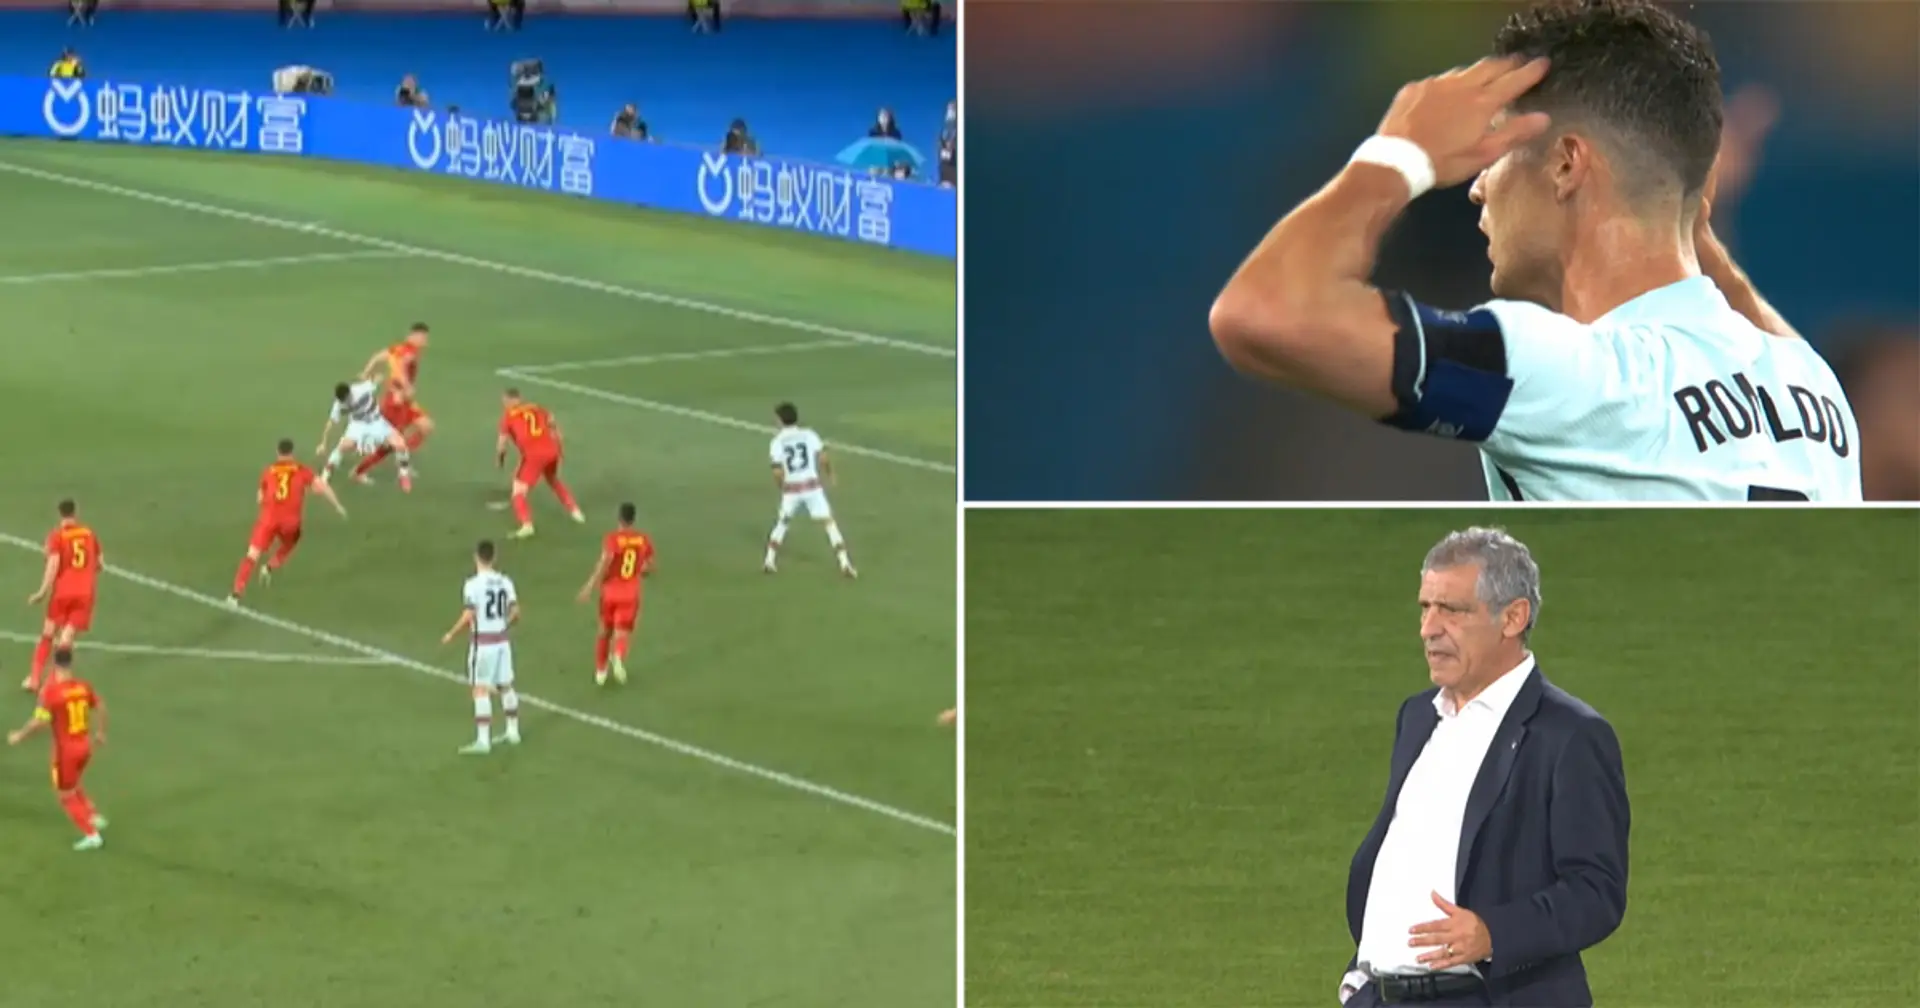 Diogo Jota misses great chance vs Belgium - reactions of Ronaldo and Portugal boss say it all